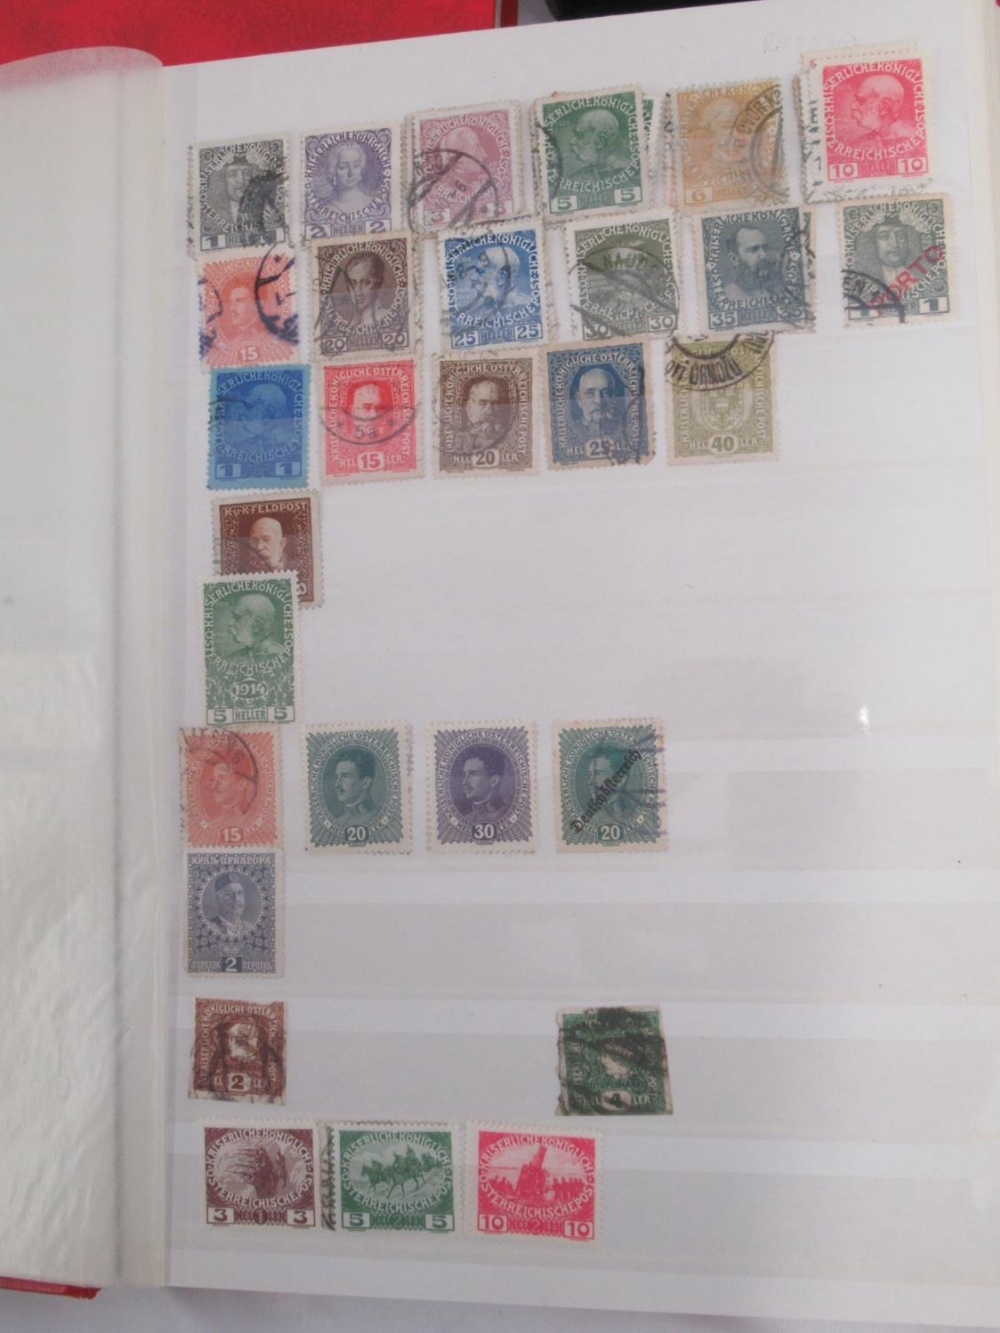 Stamp album cont. Indian stamps from the 1850s to late 1950s, stamp album cont. Austrian stamps, - Image 8 of 19